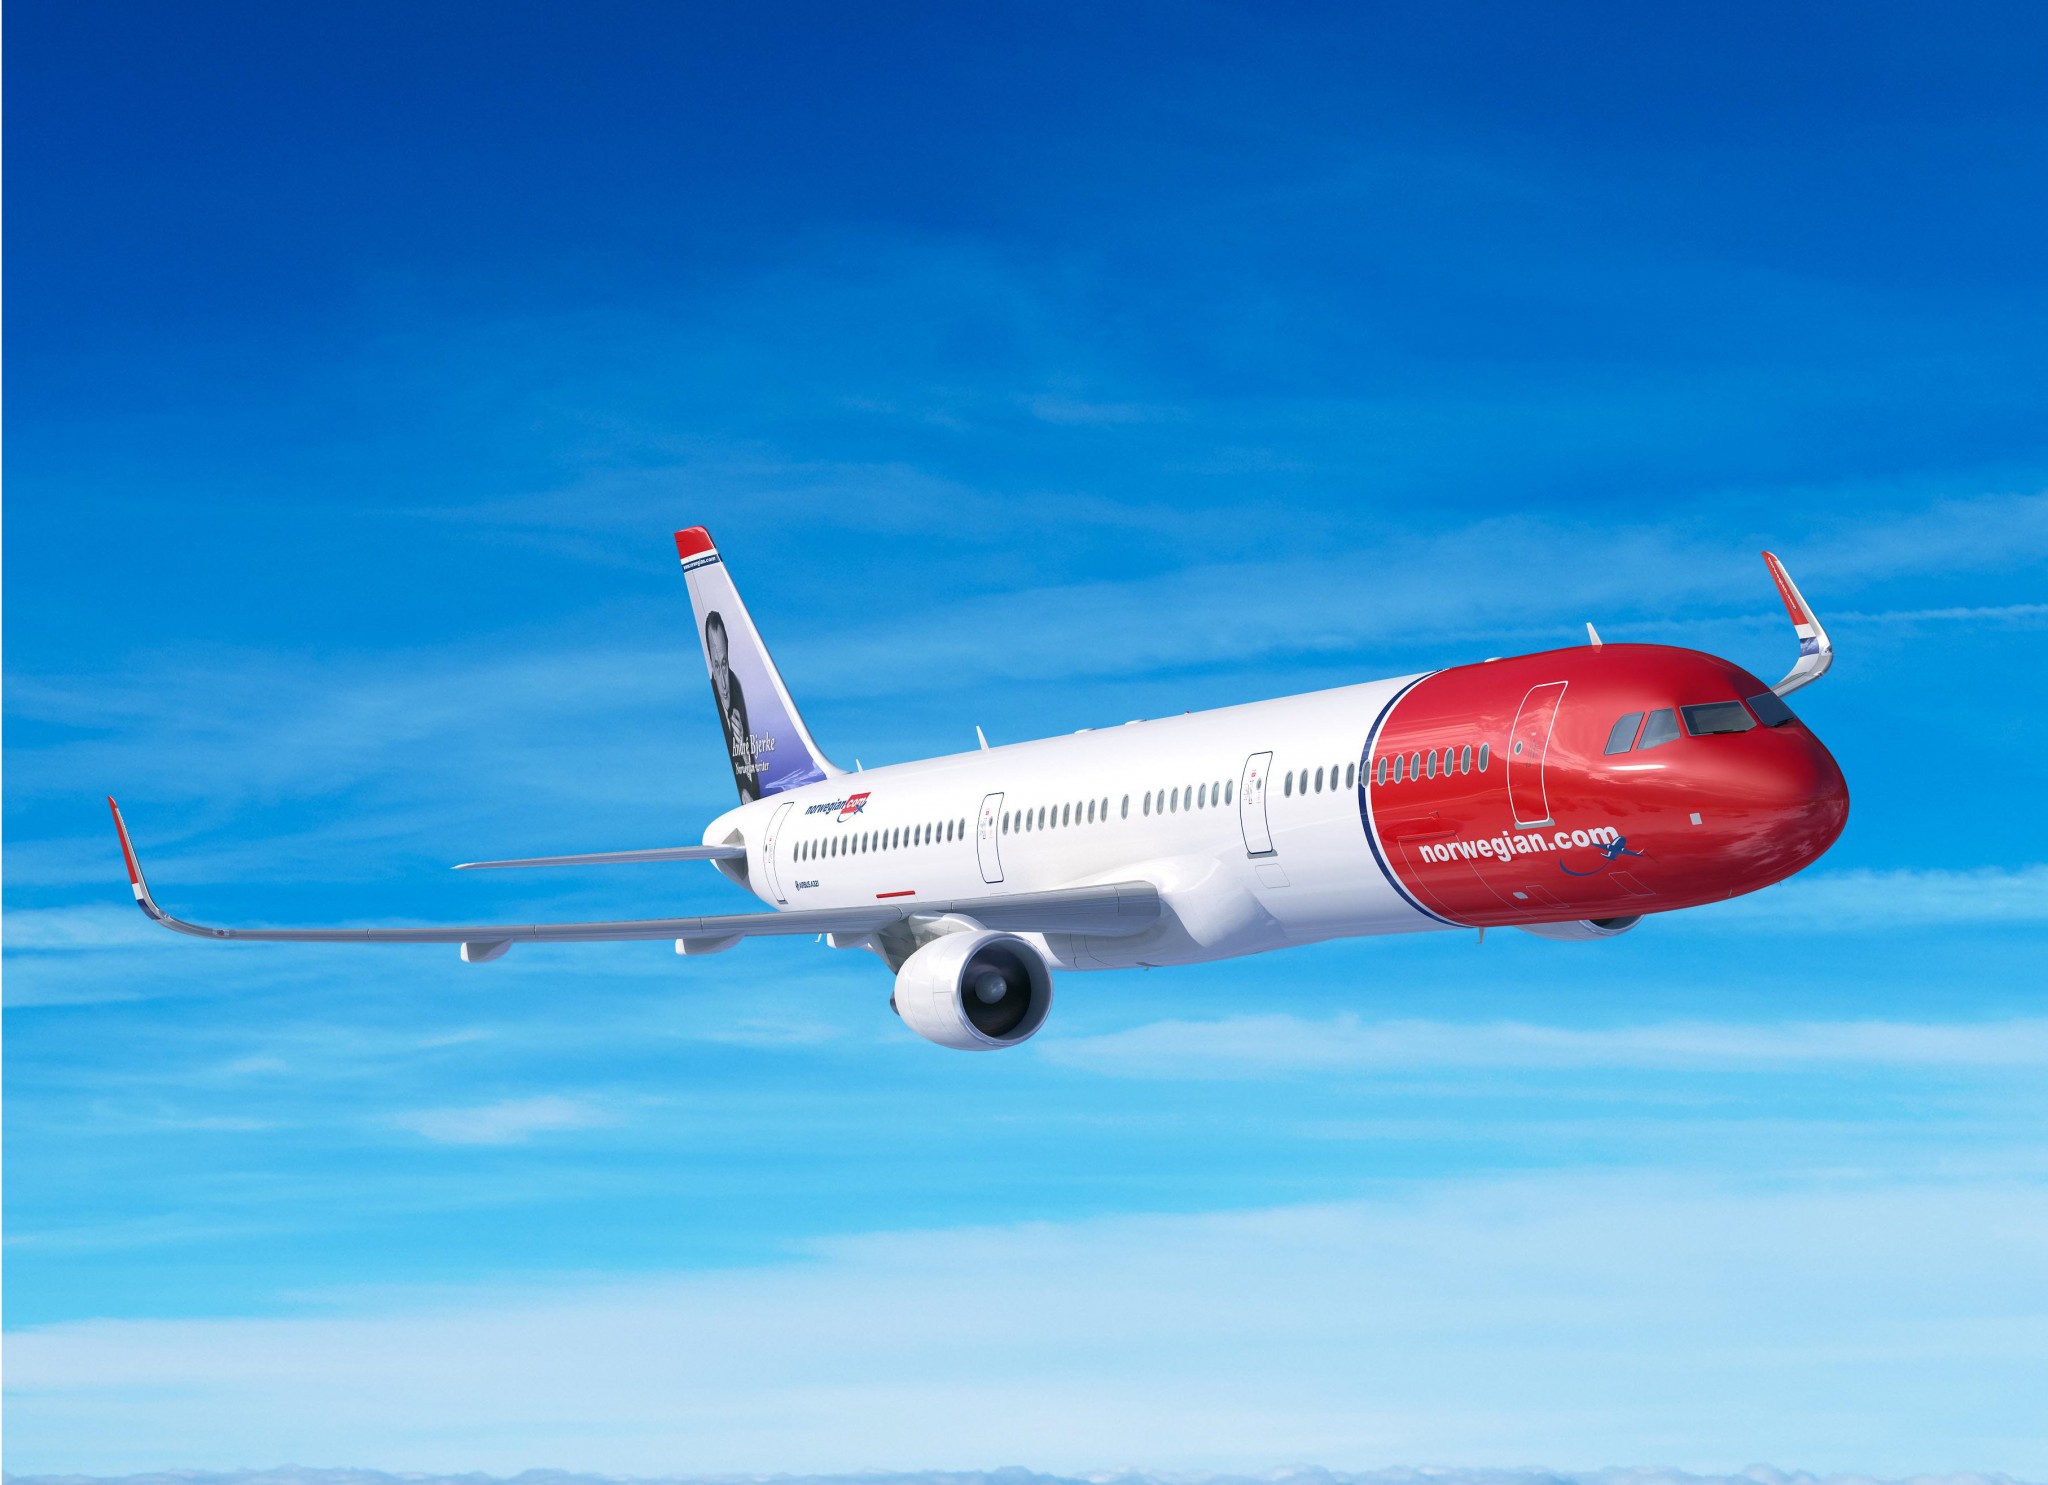 Norwegian adds new low-cost routes from Düsseldorf and Hannover